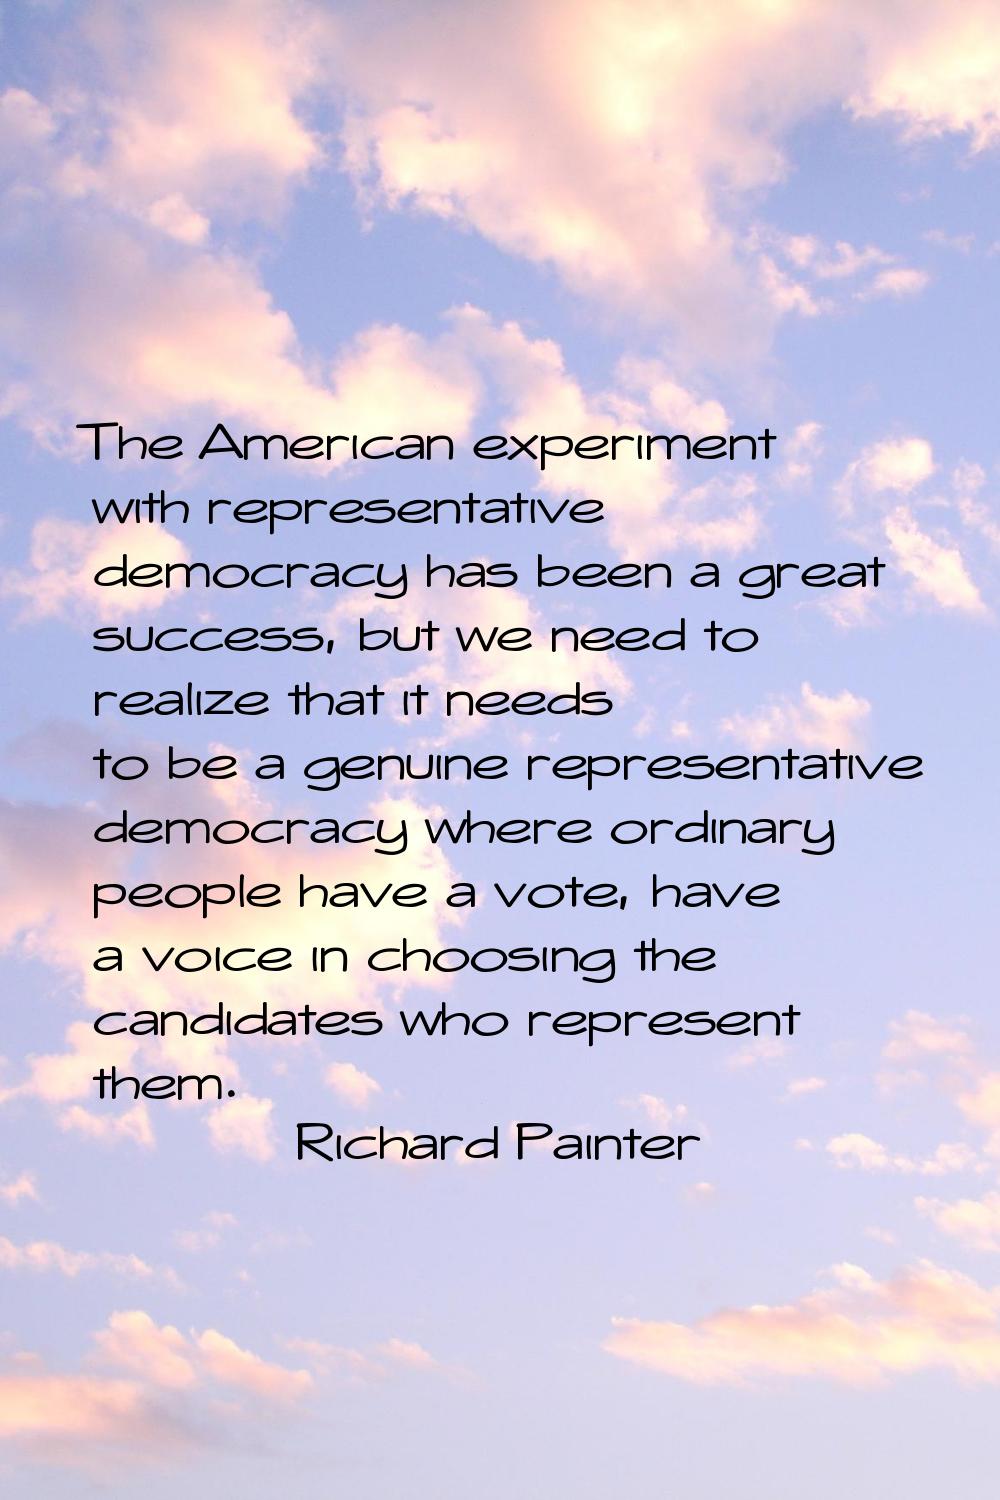 The American experiment with representative democracy has been a great success, but we need to real